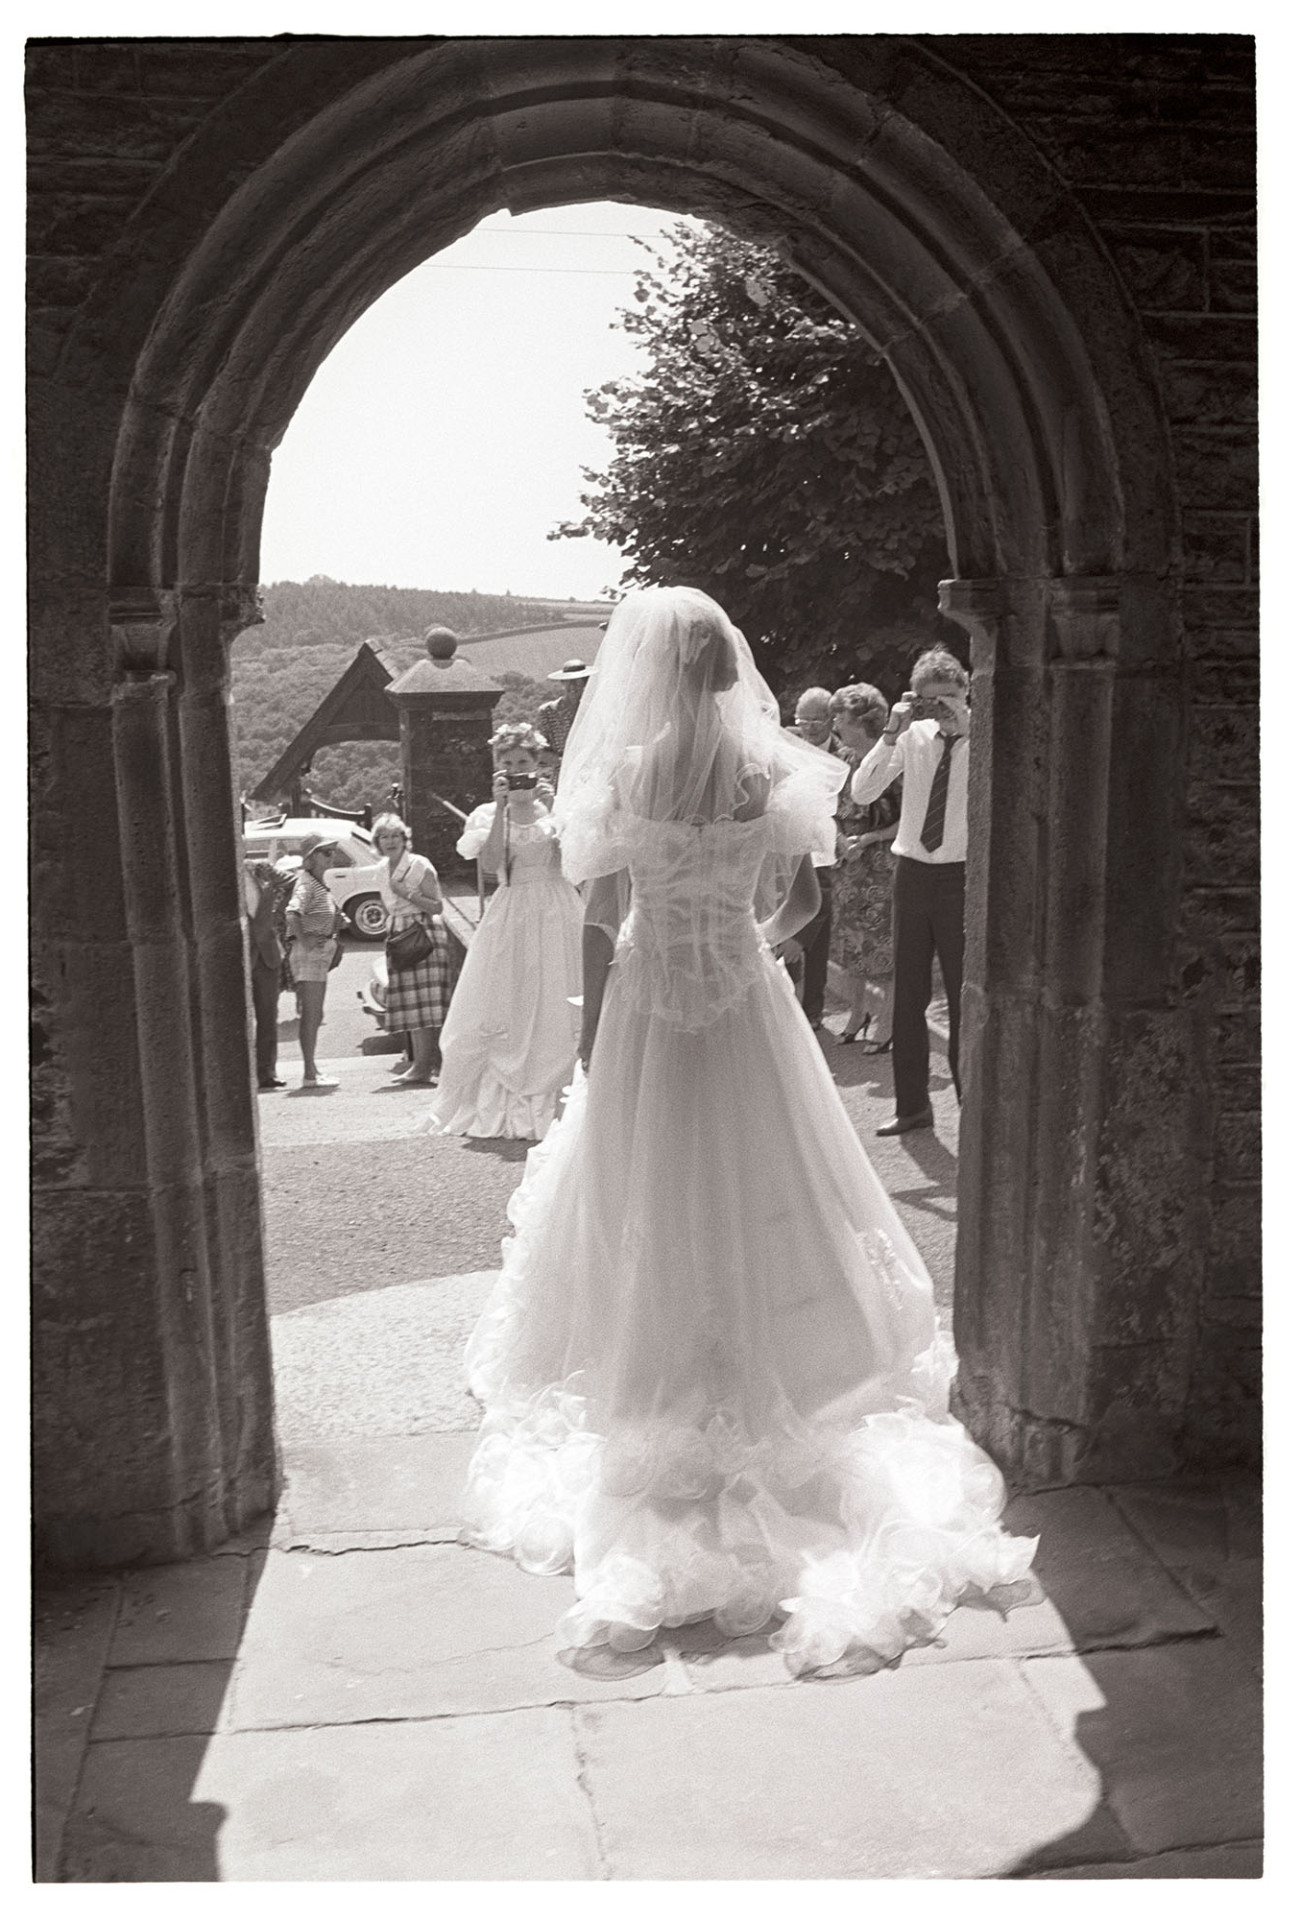 Wedding, bride at church door after wedding. 
[A bride posing at the door of Chulmleigh Church while guests take photographs from outside. The image is taken from inside Chulmleigh Church.]